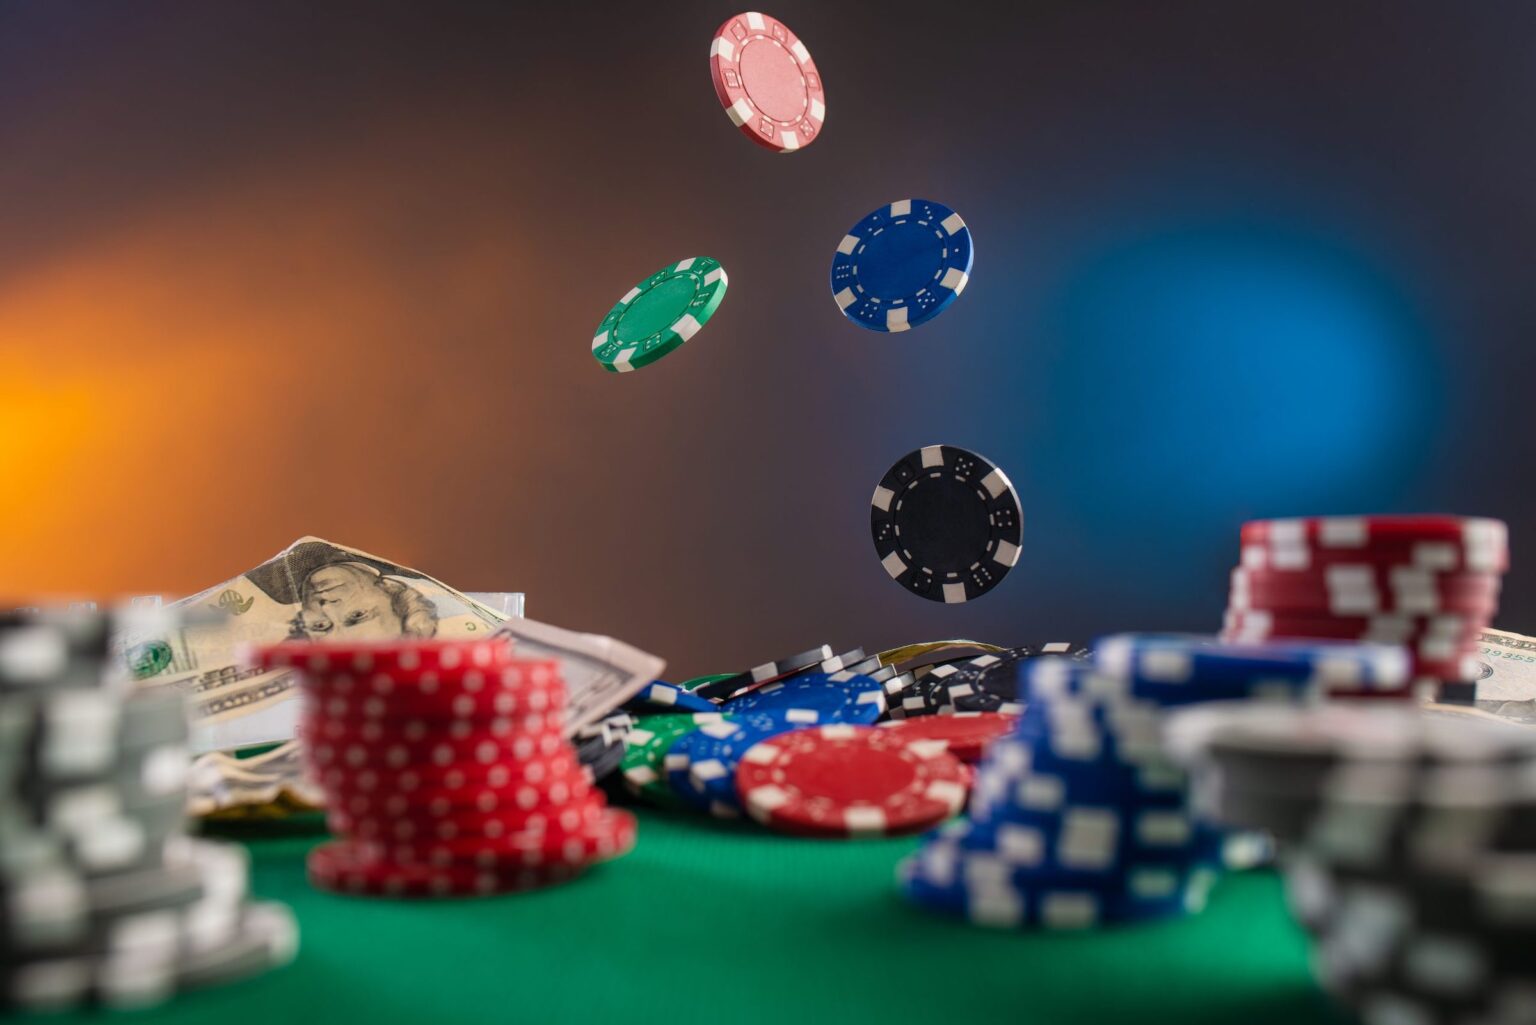 Gambling in online casinos is a popular pastime, but it can quickly evolve into a compulsive behaviour. Here's our guide to safe gambling.